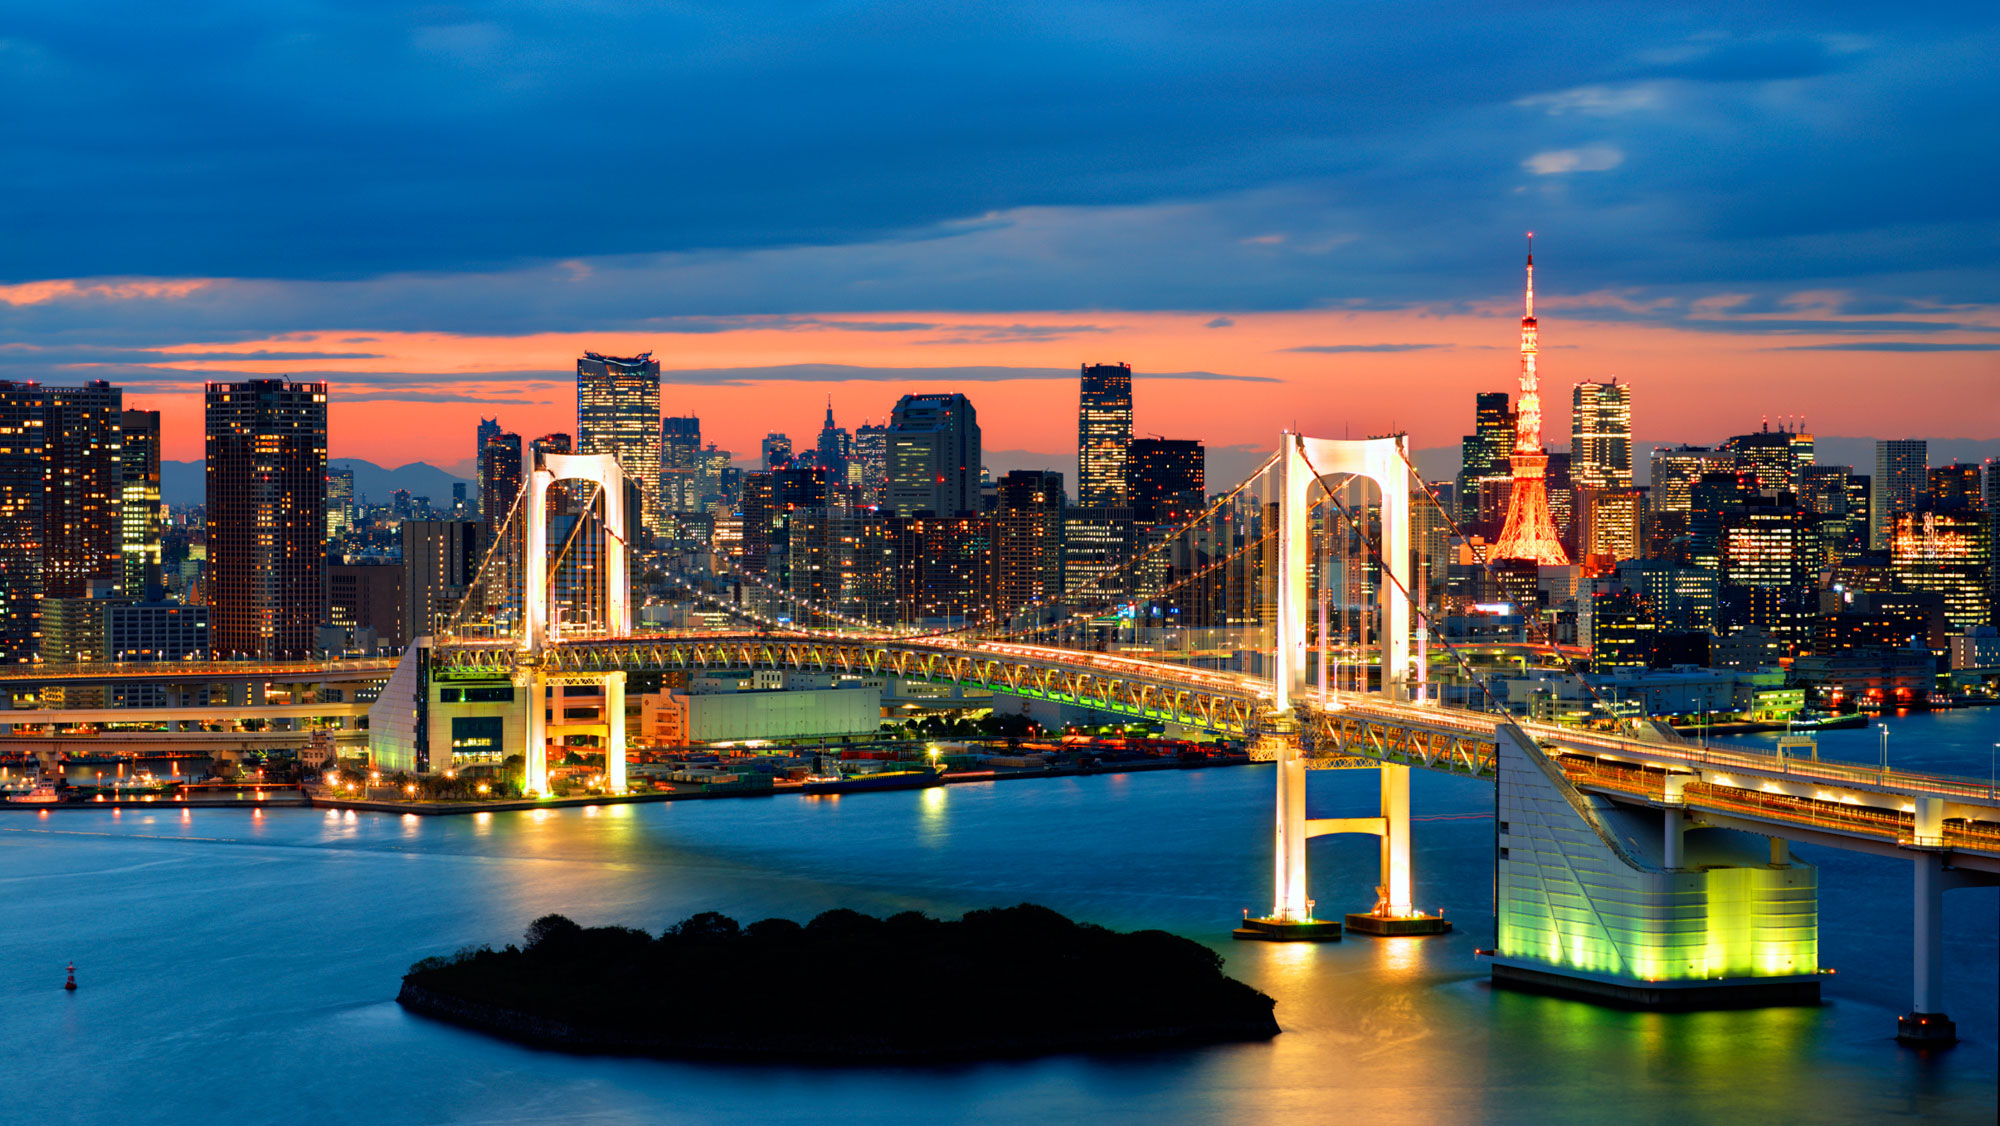  Tokyo, a city that fulfills all expectations